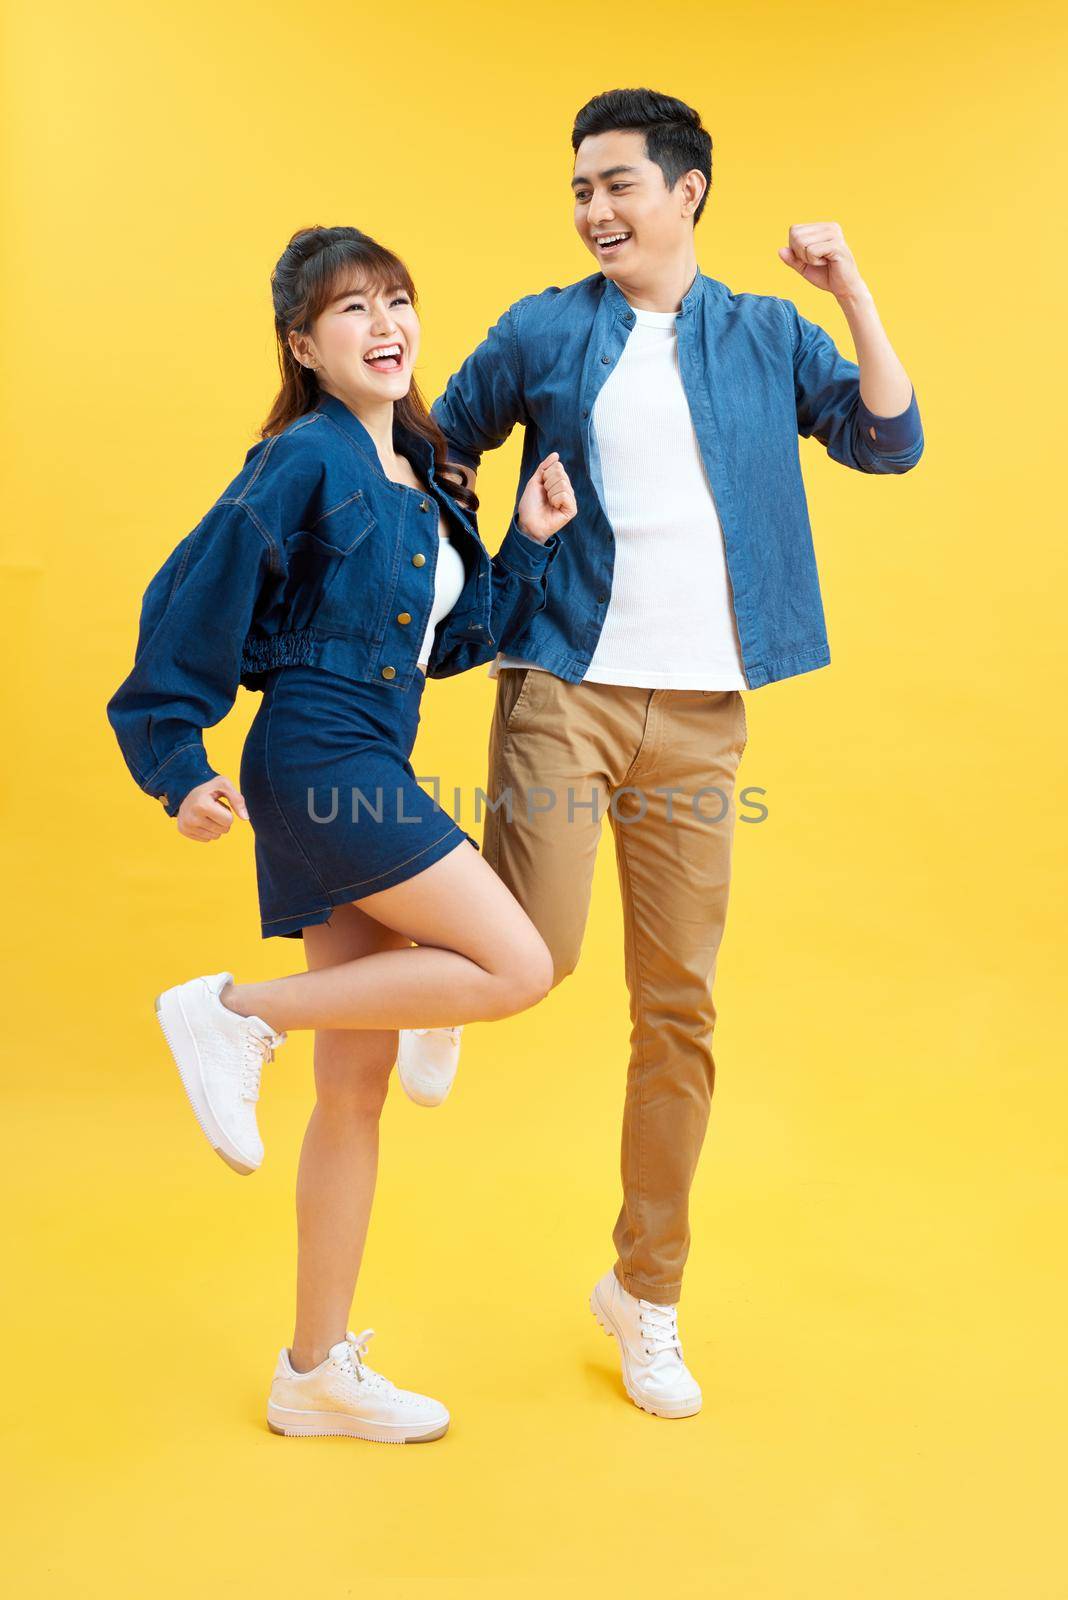 Full length body size photo funky she her he him his pair jumping high raised fists yell scream shout loud wear casual jeans denim white t-shirts isolated yellow background by makidotvn